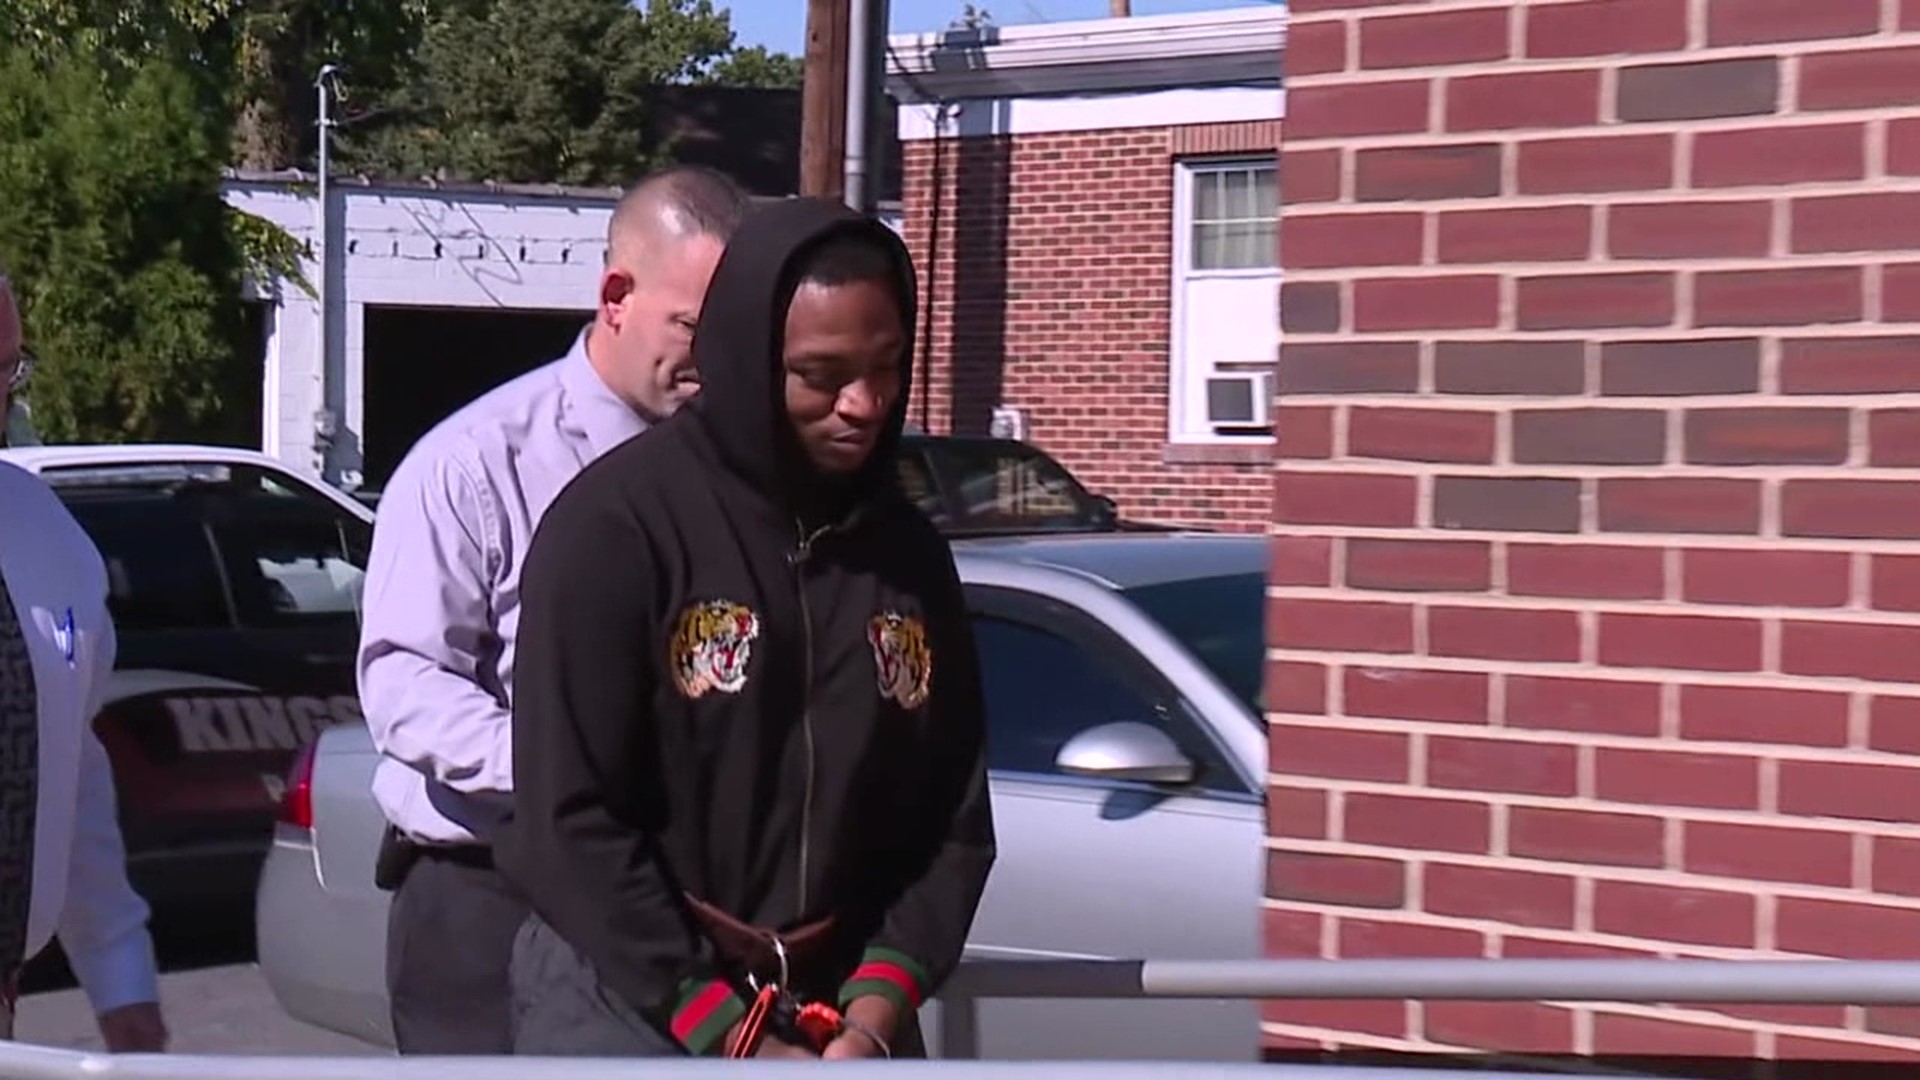 Agents with the U.S. Marshals Service brought Tyquan Lassiter from New Jersey to Kingston Thursday afternoon.